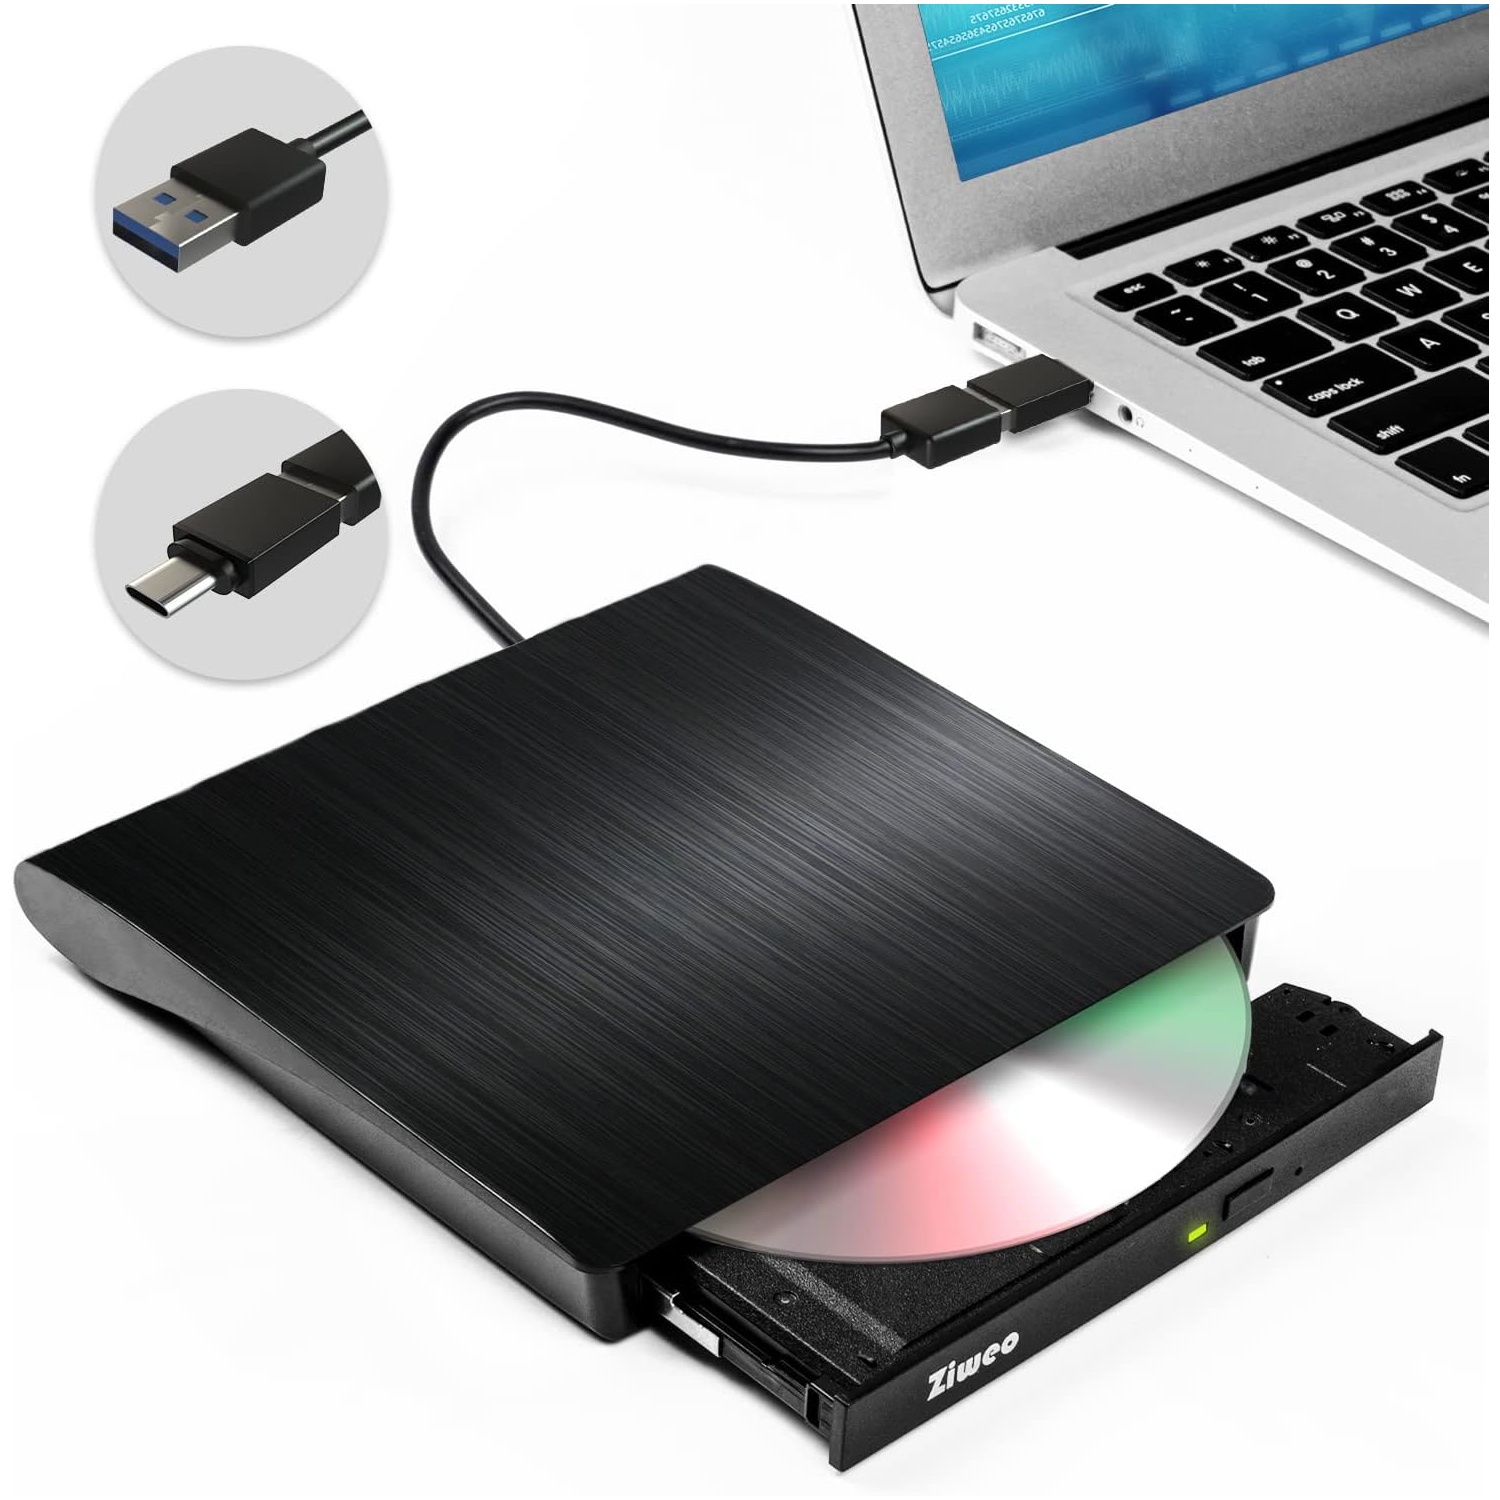 Ziweo External DVD Drive USB 3.0 Type-C CD Burner Portable CD +/-RW Drive DVD Player for ROM Rewriter Burner Compatible with Laptop Desktop PC